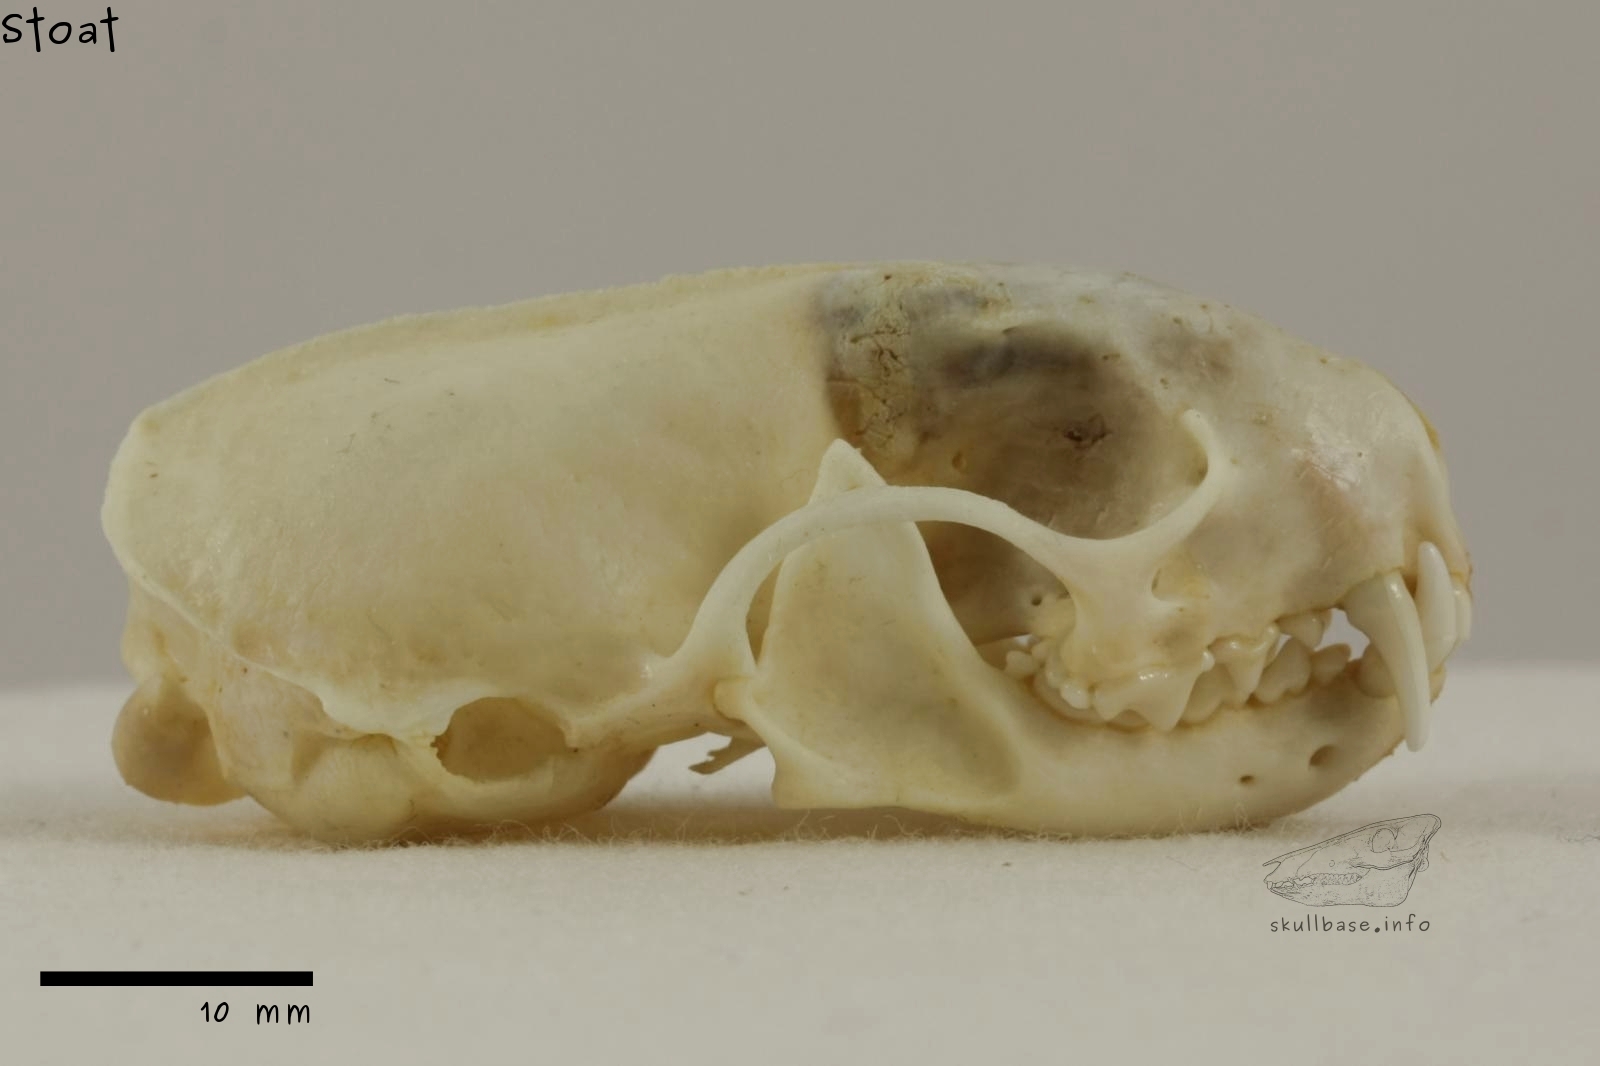 Stoat (Mustela erminea) skull lateral view